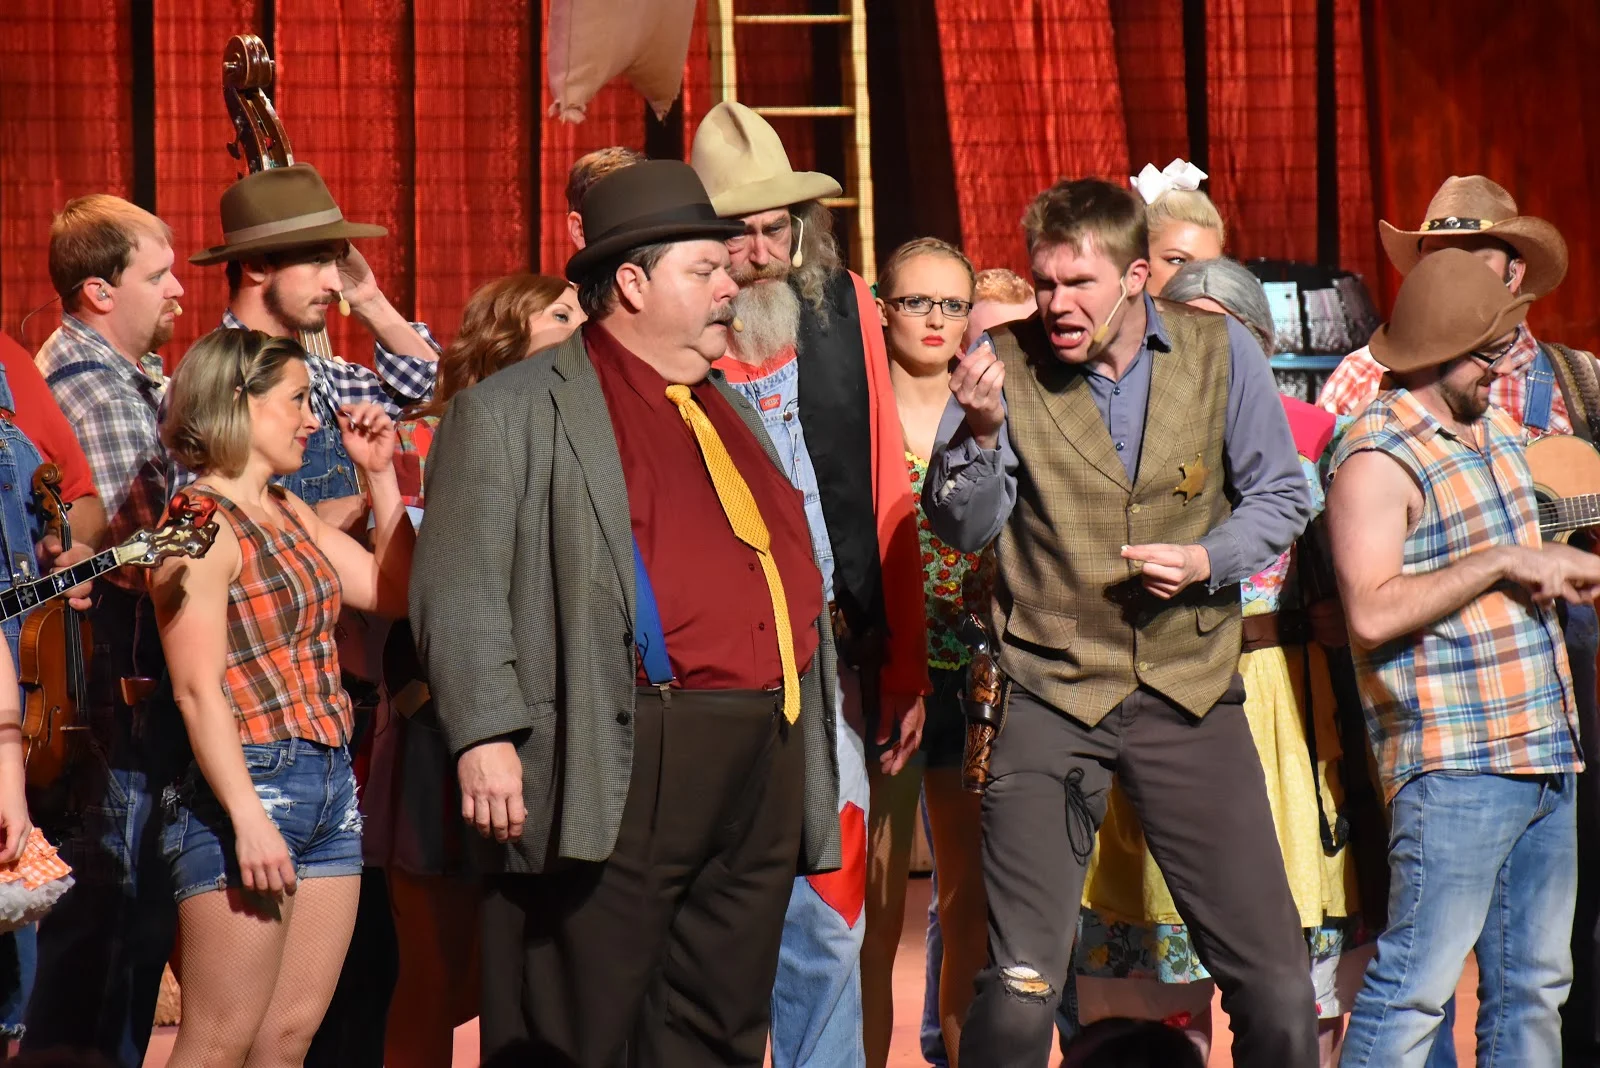 The Best Comedy Dinner Show in Pigeon Forge: Hatfield & McCoy Dinner Feud